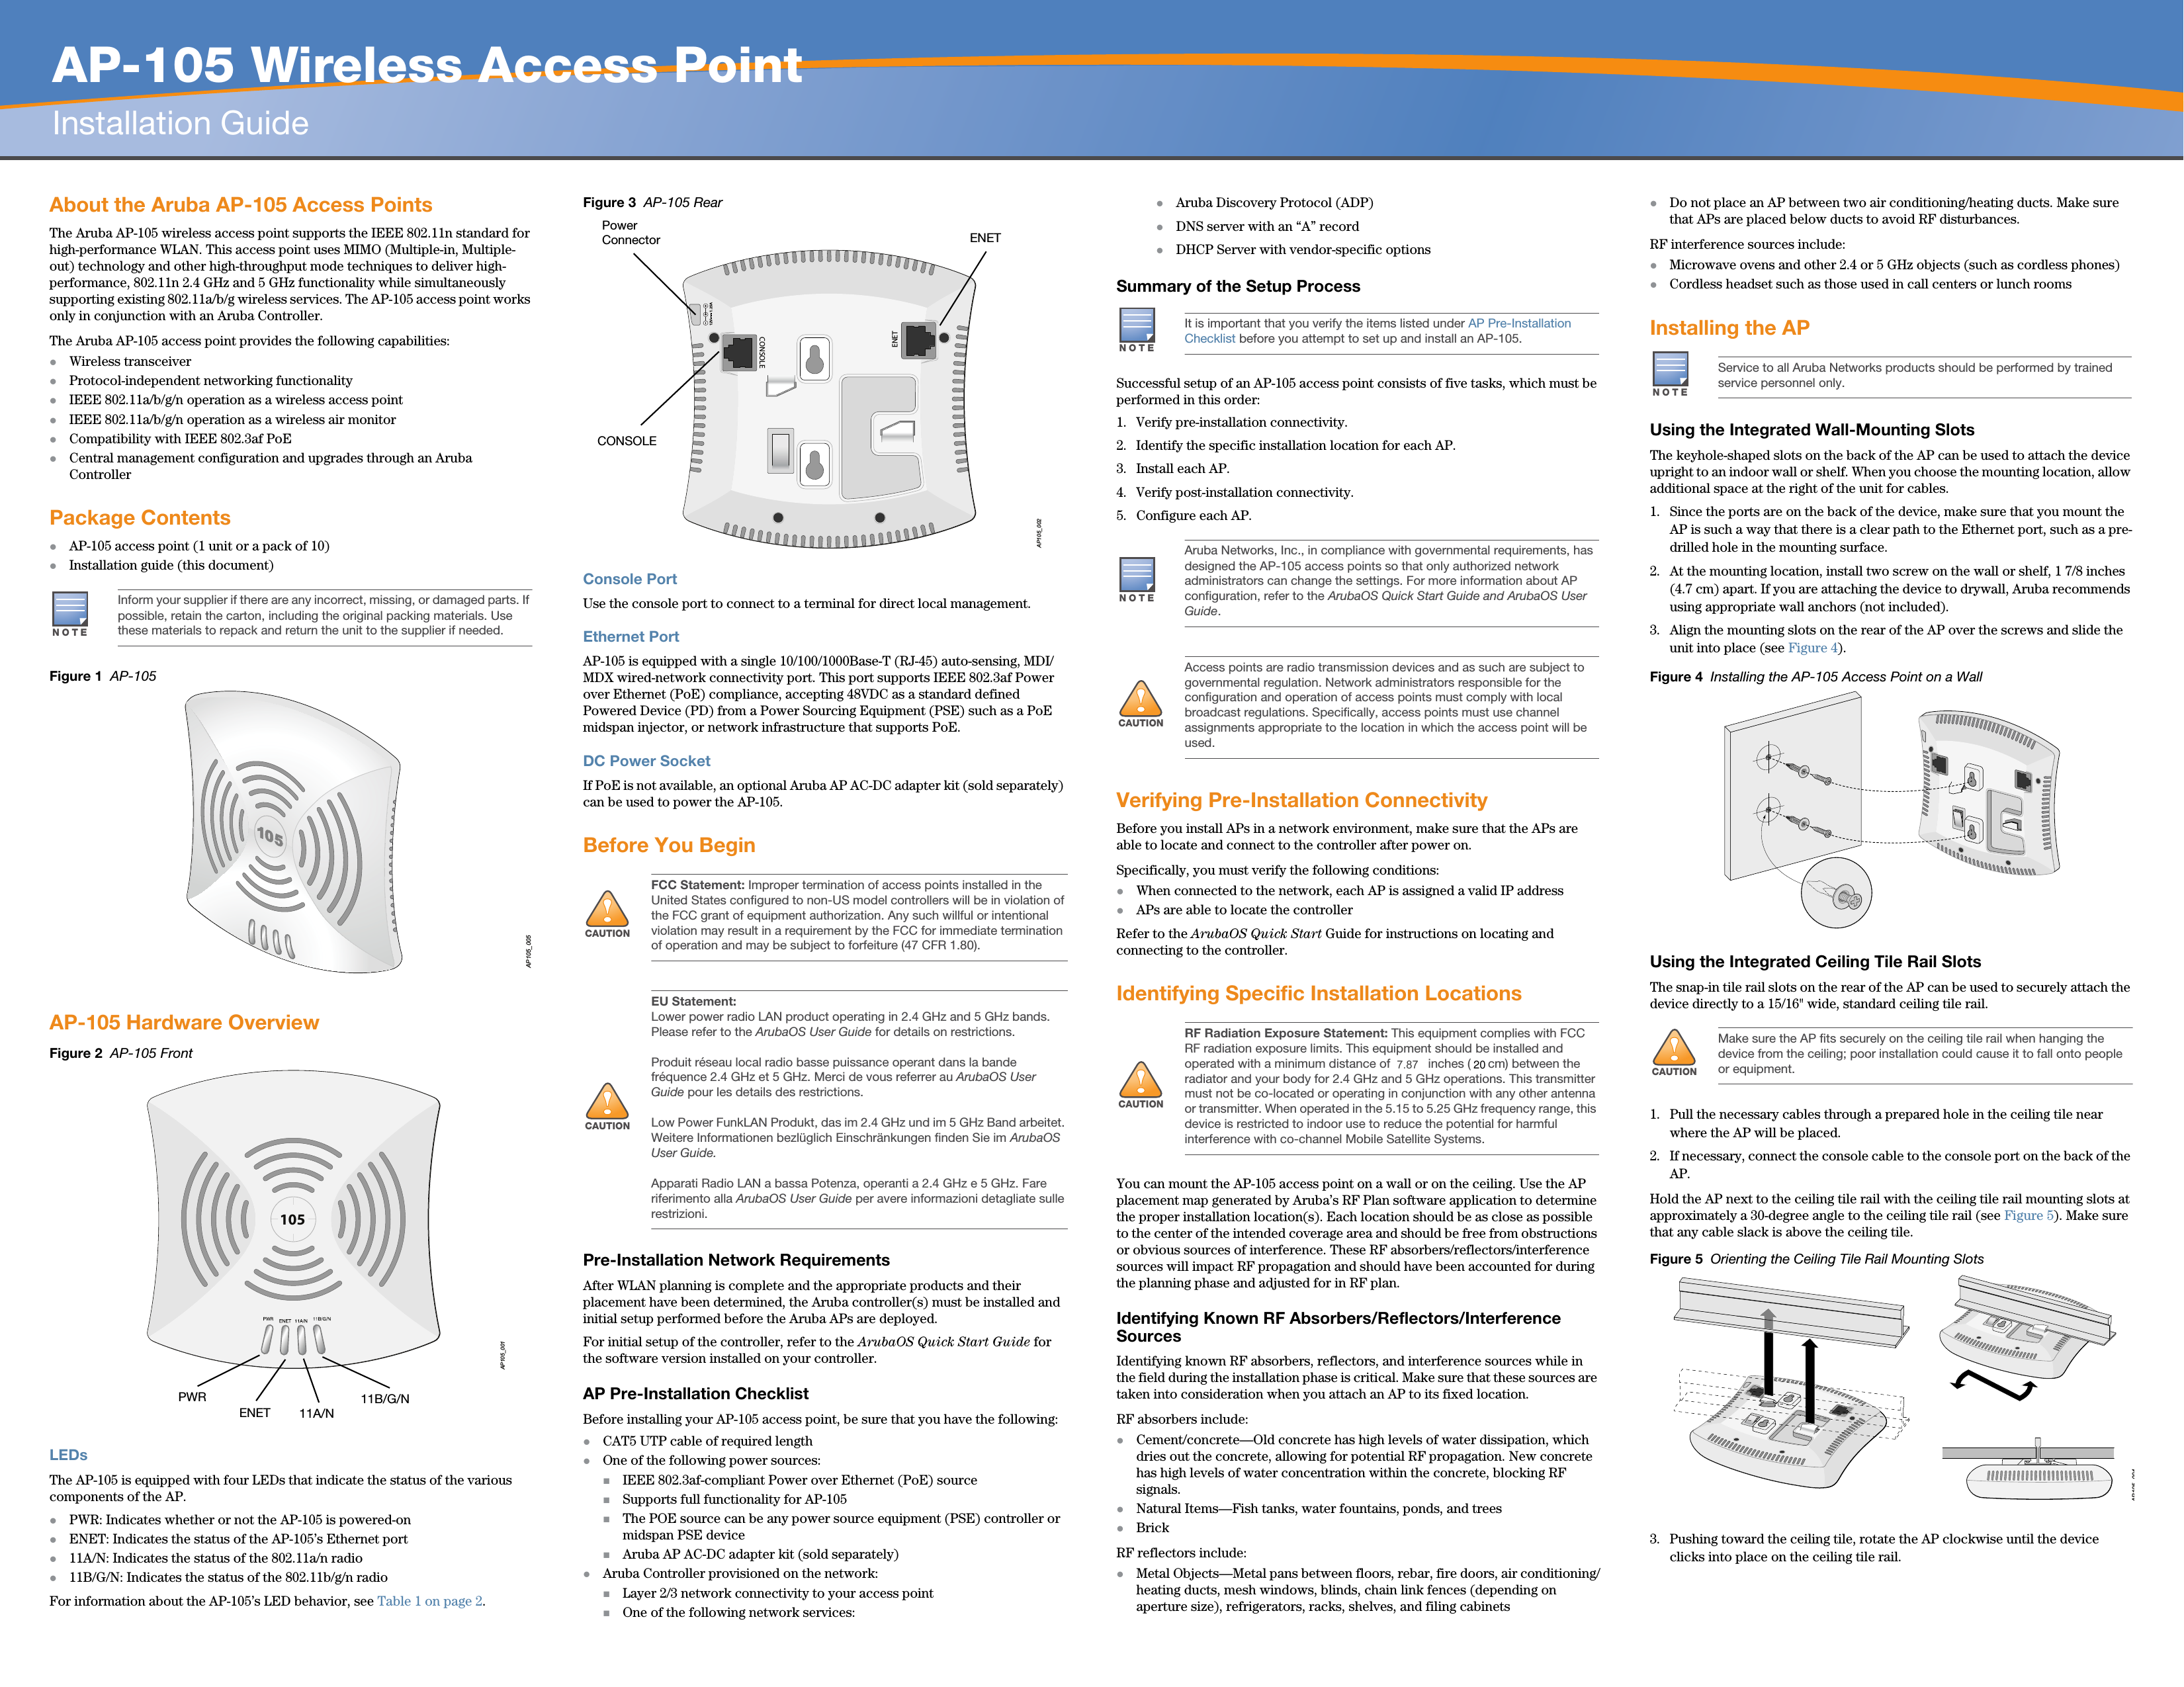   AP-105 Wireless Access PointInstallation GuideAbout the Aruba AP-105 Access PointsThe Aruba AP-105 wireless access point supports the IEEE 802.11n standard for high-performance WLAN. This access point uses MIMO (Multiple-in, Multiple-out) technology and other high-throughput mode techniques to deliver high-performance, 802.11n 2.4 GHz and 5 GHz functionality while simultaneously supporting existing 802.11a/b/g wireless services. The AP-105 access point works only in conjunction with an Aruba Controller.The Aruba AP-105 access point provides the following capabilities:zWireless transceiverzProtocol-independent networking functionalityzIEEE 802.11a/b/g/n operation as a wireless access pointzIEEE 802.11a/b/g/n operation as a wireless air monitorzCompatibility with IEEE 802.3af PoE zCentral management configuration and upgrades through an Aruba ControllerPackage ContentszAP-105 access point (1 unit or a pack of 10)zInstallation guide (this document)Figure 1  AP-105AP-105 Hardware OverviewFigure 2  AP-105 FrontLEDsThe AP-105 is equipped with four LEDs that indicate the status of the various components of the AP.zPWR: Indicates whether or not the AP-105 is powered-onzENET: Indicates the status of the AP-105’s Ethernet portz11A/N: Indicates the status of the 802.11a/n radioz11B/G/N: Indicates the status of the 802.11b/g/n radioFor information about the AP-105’s LED behavior, see Table 1 on page 2.Figure 3  AP-105 RearConsole PortUse the console port to connect to a terminal for direct local management.Ethernet PortAP-105 is equipped with a single 10/100/1000Base-T (RJ-45) auto-sensing, MDI/MDX wired-network connectivity port. This port supports IEEE 802.3af Power over Ethernet (PoE) compliance, accepting 48VDC as a standard defined Powered Device (PD) from a Power Sourcing Equipment (PSE) such as a PoE midspan injector, or network infrastructure that supports PoE.DC Power SocketIf PoE is not available, an optional Aruba AP AC-DC adapter kit (sold separately) can be used to power the AP-105. Before You BeginPre-Installation Network RequirementsAfter WLAN planning is complete and the appropriate products and their placement have been determined, the Aruba controller(s) must be installed and initial setup performed before the Aruba APs are deployed.For initial setup of the controller, refer to the ArubaOS Quick Start Guide for the software version installed on your controller.AP Pre-Installation ChecklistBefore installing your AP-105 access point, be sure that you have the following:zCAT5 UTP cable of required lengthzOne of the following power sources:IEEE 802.3af-compliant Power over Ethernet (PoE) sourceSupports full functionality for AP-105The POE source can be any power source equipment (PSE) controller or midspan PSE deviceAruba AP AC-DC adapter kit (sold separately)zAruba Controller provisioned on the network:Layer 2/3 network connectivity to your access pointOne of the following network services:zAruba Discovery Protocol (ADP)zDNS server with an “A” recordzDHCP Server with vendor-specific optionsSummary of the Setup ProcessSuccessful setup of an AP-105 access point consists of five tasks, which must be performed in this order:1. Verify pre-installation connectivity.2. Identify the specific installation location for each AP.3. Install each AP.4. Verify post-installation connectivity.5. Configure each AP.Verifying Pre-Installation ConnectivityBefore you install APs in a network environment, make sure that the APs are able to locate and connect to the controller after power on.Specifically, you must verify the following conditions:zWhen connected to the network, each AP is assigned a valid IP addresszAPs are able to locate the controller Refer to the ArubaOS Quick Start Guide for instructions on locating and connecting to the controller.Identifying Specific Installation LocationsYou can mount the AP-105 access point on a wall or on the ceiling. Use the AP placement map generated by Aruba’s RF Plan software application to determine the proper installation location(s). Each location should be as close as possible to the center of the intended coverage area and should be free from obstructions or obvious sources of interference. These RF absorbers/reflectors/interference sources will impact RF propagation and should have been accounted for during the planning phase and adjusted for in RF plan.Identifying Known RF Absorbers/Reflectors/Interference SourcesIdentifying known RF absorbers, reflectors, and interference sources while in the field during the installation phase is critical. Make sure that these sources are taken into consideration when you attach an AP to its fixed location.RF absorbers include:zCement/concrete—Old concrete has high levels of water dissipation, which dries out the concrete, allowing for potential RF propagation. New concrete has high levels of water concentration within the concrete, blocking RF signals.zNatural Items—Fish tanks, water fountains, ponds, and treeszBrickRF reflectors include:zMetal Objects—Metal pans between floors, rebar, fire doors, air conditioning/heating ducts, mesh windows, blinds, chain link fences (depending on aperture size), refrigerators, racks, shelves, and filing cabinetszDo not place an AP between two air conditioning/heating ducts. Make sure that APs are placed below ducts to avoid RF disturbances.RF interference sources include:zMicrowave ovens and other 2.4 or 5 GHz objects (such as cordless phones)zCordless headset such as those used in call centers or lunch roomsInstalling the APUsing the Integrated Wall-Mounting SlotsThe keyhole-shaped slots on the back of the AP can be used to attach the device upright to an indoor wall or shelf. When you choose the mounting location, allow additional space at the right of the unit for cables.1. Since the ports are on the back of the device, make sure that you mount the AP is such a way that there is a clear path to the Ethernet port, such as a pre-drilled hole in the mounting surface.2. At the mounting location, install two screw on the wall or shelf, 1 7/8 inches (4.7 cm) apart. If you are attaching the device to drywall, Aruba recommends using appropriate wall anchors (not included).3. Align the mounting slots on the rear of the AP over the screws and slide the unit into place (see Figure 4).Figure 4  Installing the AP-105 Access Point on a WallUsing the Integrated Ceiling Tile Rail SlotsThe snap-in tile rail slots on the rear of the AP can be used to securely attach the device directly to a 15/16&quot; wide, standard ceiling tile rail.1. Pull the necessary cables through a prepared hole in the ceiling tile near where the AP will be placed.2. If necessary, connect the console cable to the console port on the back of the AP.Hold the AP next to the ceiling tile rail with the ceiling tile rail mounting slots at approximately a 30-degree angle to the ceiling tile rail (see Figure 5). Make sure that any cable slack is above the ceiling tile.Figure 5  Orienting the Ceiling Tile Rail Mounting Slots3. Pushing toward the ceiling tile, rotate the AP clockwise until the device clicks into place on the ceiling tile rail.NOTEInform your supplier if there are any incorrect, missing, or damaged parts. If possible, retain the carton, including the original packing materials. Use these materials to repack and return the unit to the supplier if needed.AP105_005AP105_001105PWRENET 11B/G/N11A/N!CAUTIONFCC Statement: Improper termination of access points installed in the United States configured to non-US model controllers will be in violation of the FCC grant of equipment authorization. Any such willful or intentional violation may result in a requirement by the FCC for immediate termination of operation and may be subject to forfeiture (47 CFR 1.80).!CAUTIONEU Statement: Lower power radio LAN product operating in 2.4 GHz and 5 GHz bands. Please refer to the ArubaOS User Guide for details on restrictions.Produit réseau local radio basse puissance operant dans la bande fréquence 2.4 GHz et 5 GHz. Merci de vous referrer au ArubaOS User Guide pour les details des restrictions.Low Power FunkLAN Produkt, das im 2.4 GHz und im 5 GHz Band arbeitet. Weitere Informationen bezlüglich Einschränkungen finden Sie im ArubaOS User Guide.Apparati Radio LAN a bassa Potenza, operanti a 2.4 GHz e 5 GHz. Fare riferimento alla ArubaOS User Guide per avere informazioni detagliate sulle restrizioni.AP105_002CONSOLEENET12V       1.25ACONSOLEENETPower ConnectorNOTEIt is important that you verify the items listed under AP Pre-Installation Checklist before you attempt to set up and install an AP-105.NOTEAruba Networks, Inc., in compliance with governmental requirements, has designed the AP-105 access points so that only authorized network administrators can change the settings. For more information about AP configuration, refer to the ArubaOS Quick Start Guide and ArubaOS User Guide.!CAUTIONAccess points are radio transmission devices and as such are subject to governmental regulation. Network administrators responsible for the configuration and operation of access points must comply with local broadcast regulations. Specifically, access points must use channel assignments appropriate to the location in which the access point will be used.!CAUTIONRF Radiation Exposure Statement: This equipment complies with FCC RF radiation exposure limits. This equipment should be installed and operated with a minimum distance of 13.78 inches (35 cm) between the radiator and your body for 2.4 GHz and 5 GHz operations. This transmitter must not be co-located or operating in conjunction with any other antenna or transmitter. When operated in the 5.15 to 5.25 GHz frequency range, this device is restricted to indoor use to reduce the potential for harmful interference with co-channel Mobile Satellite Systems.NOTEService to all Aruba Networks products should be performed by trained service personnel only.!CAUTIONMake sure the AP fits securely on the ceiling tile rail when hanging the device from the ceiling; poor installation could cause it to fall onto people or equipment.AP105 0047.8720